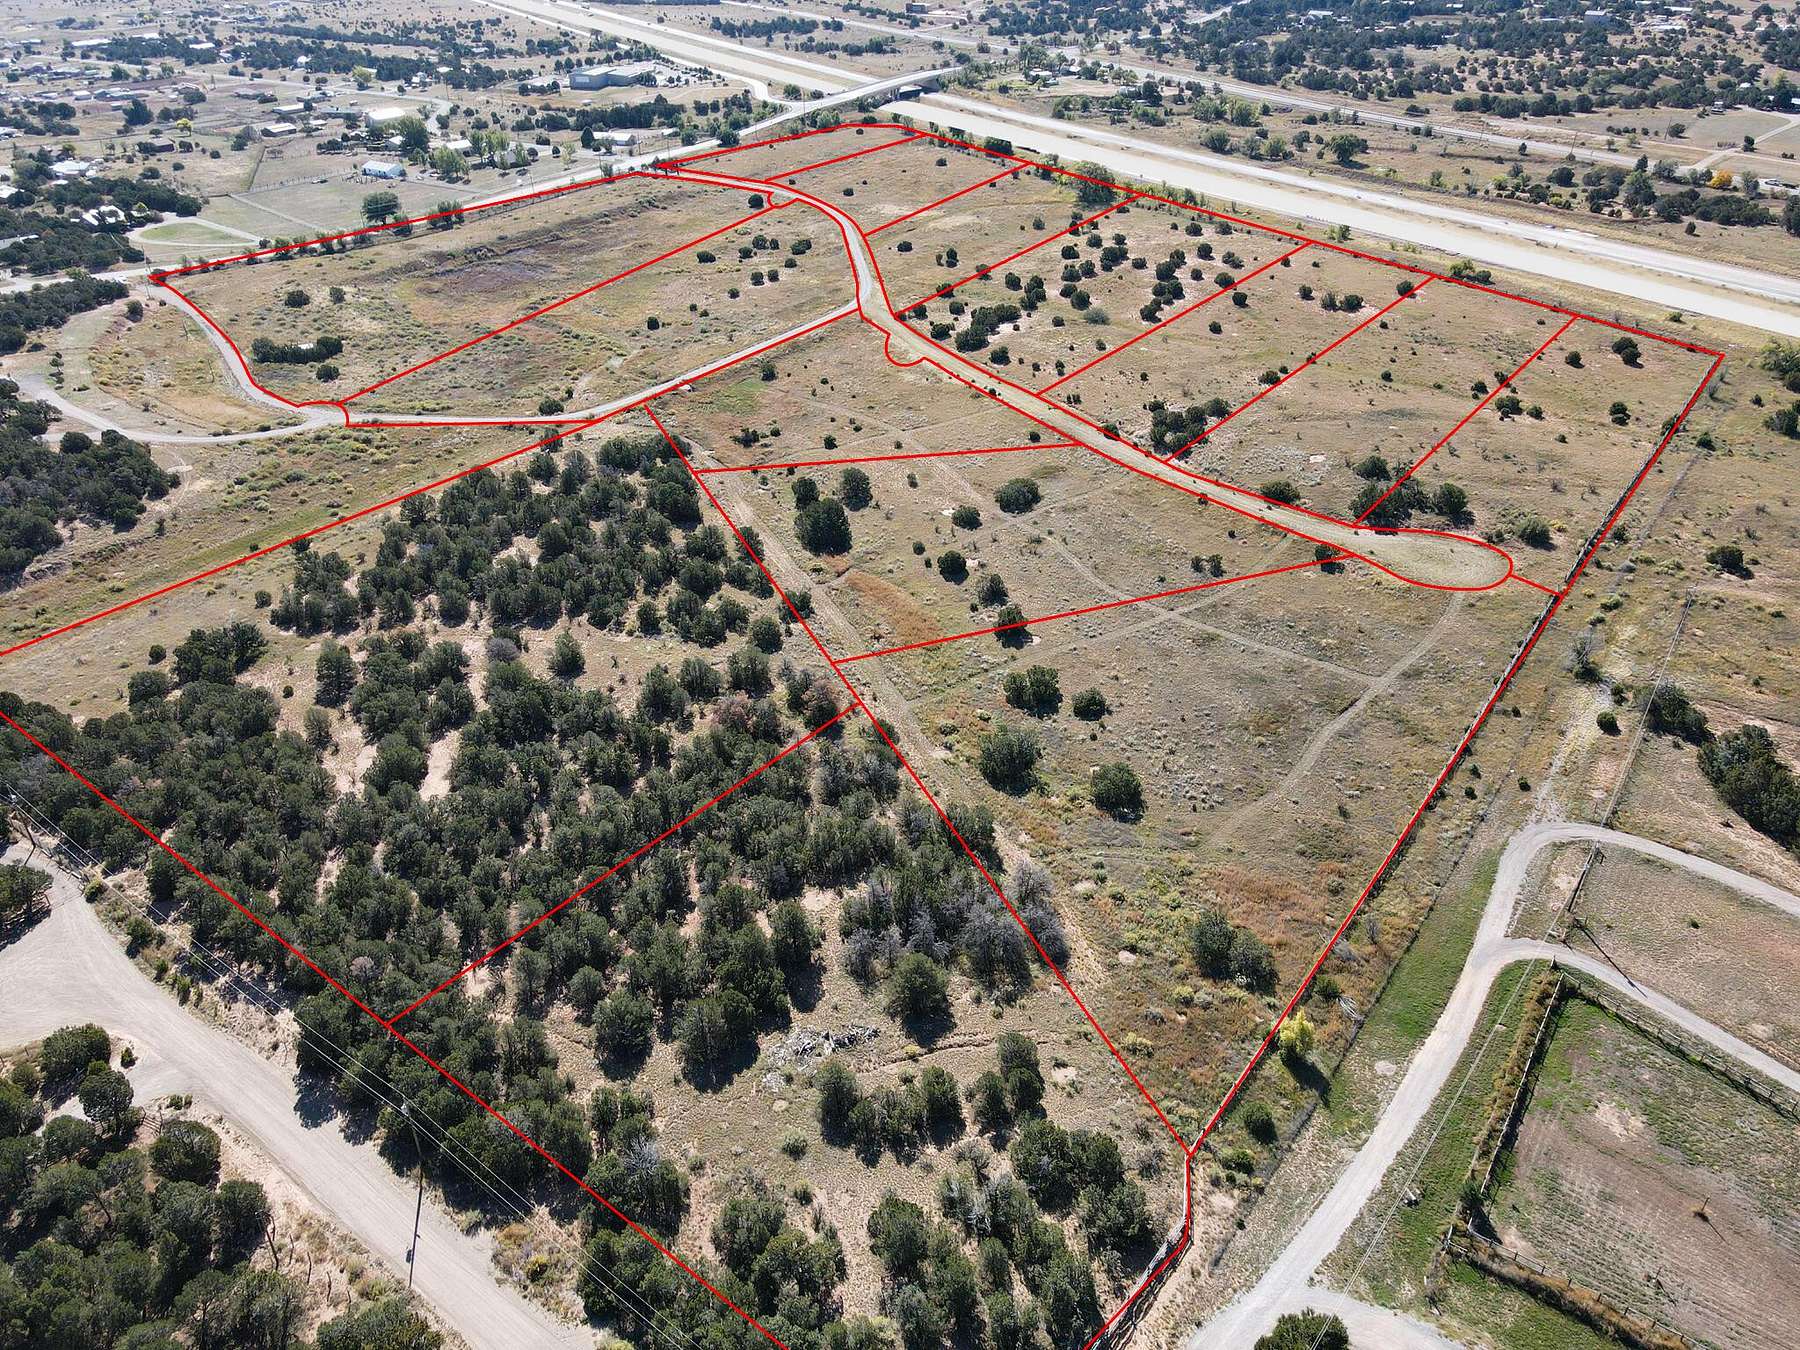 38 Acres of Land for Sale in Tijeras, New Mexico